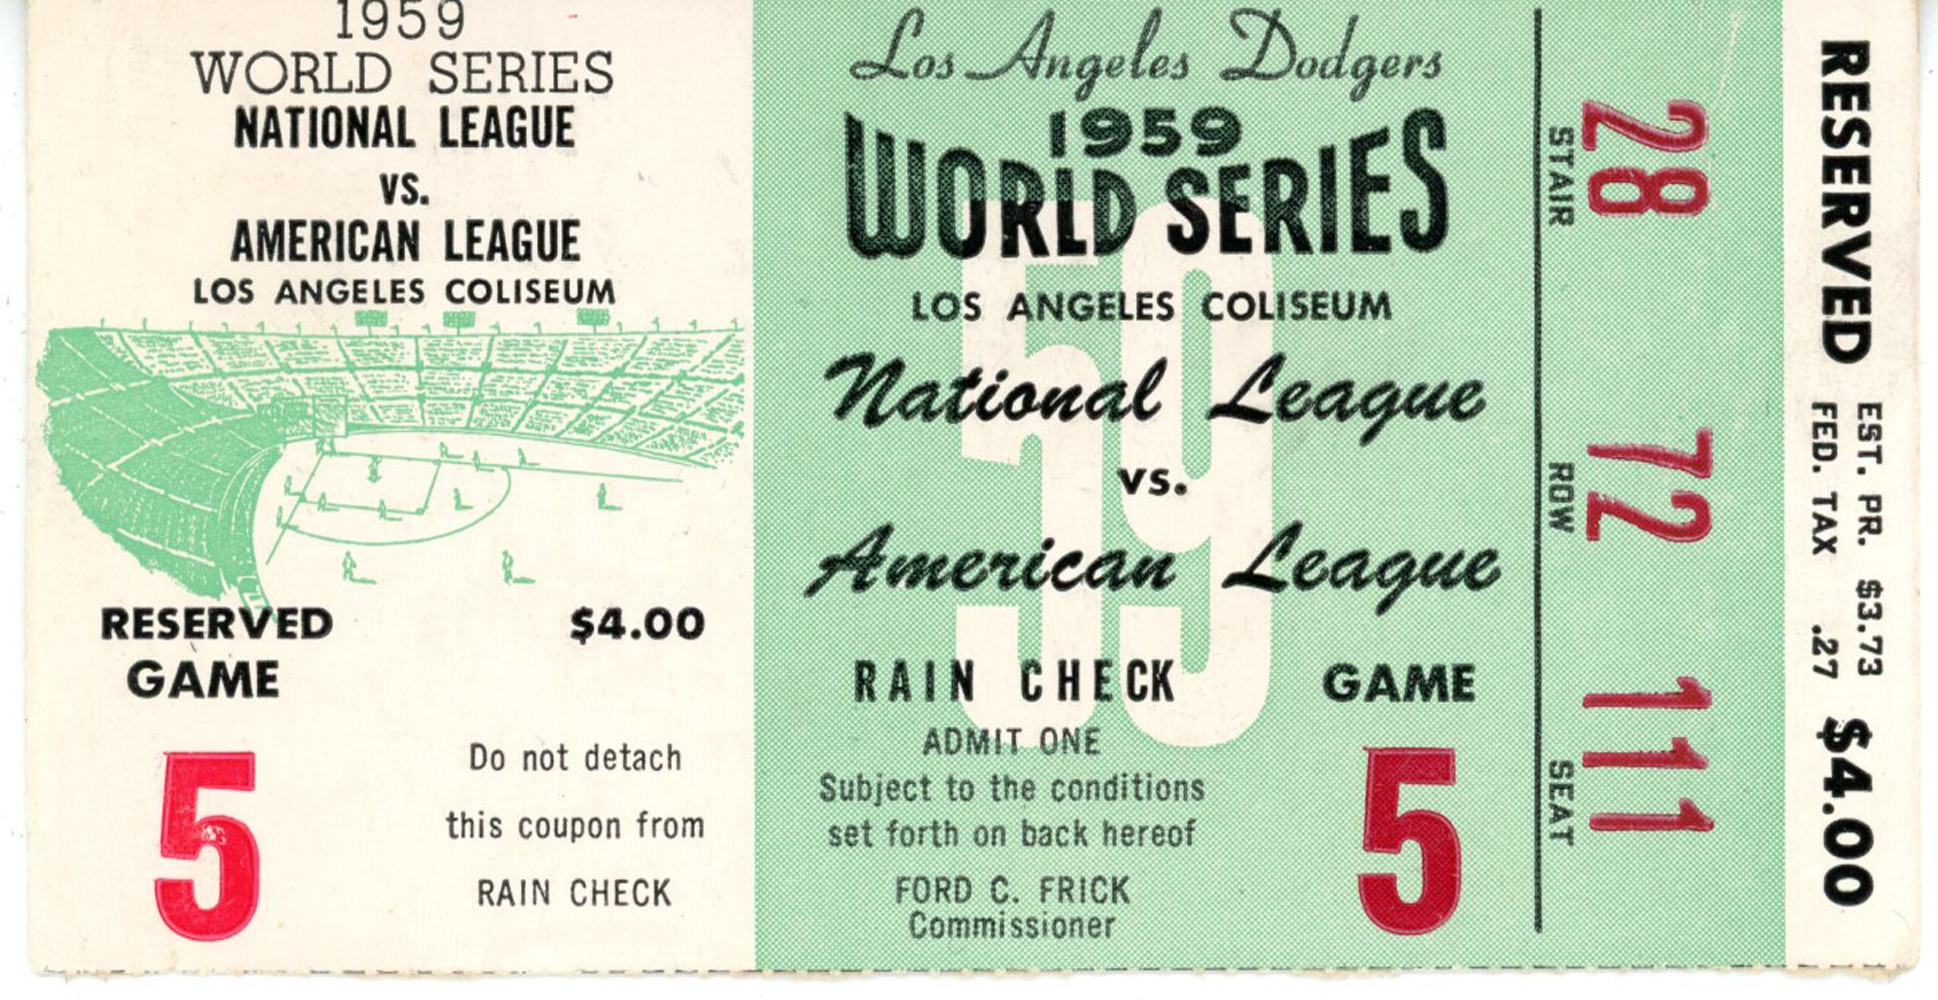 1959 World Series Game 5 Ticket Stub Los Angeles Dodgers vs White Sox